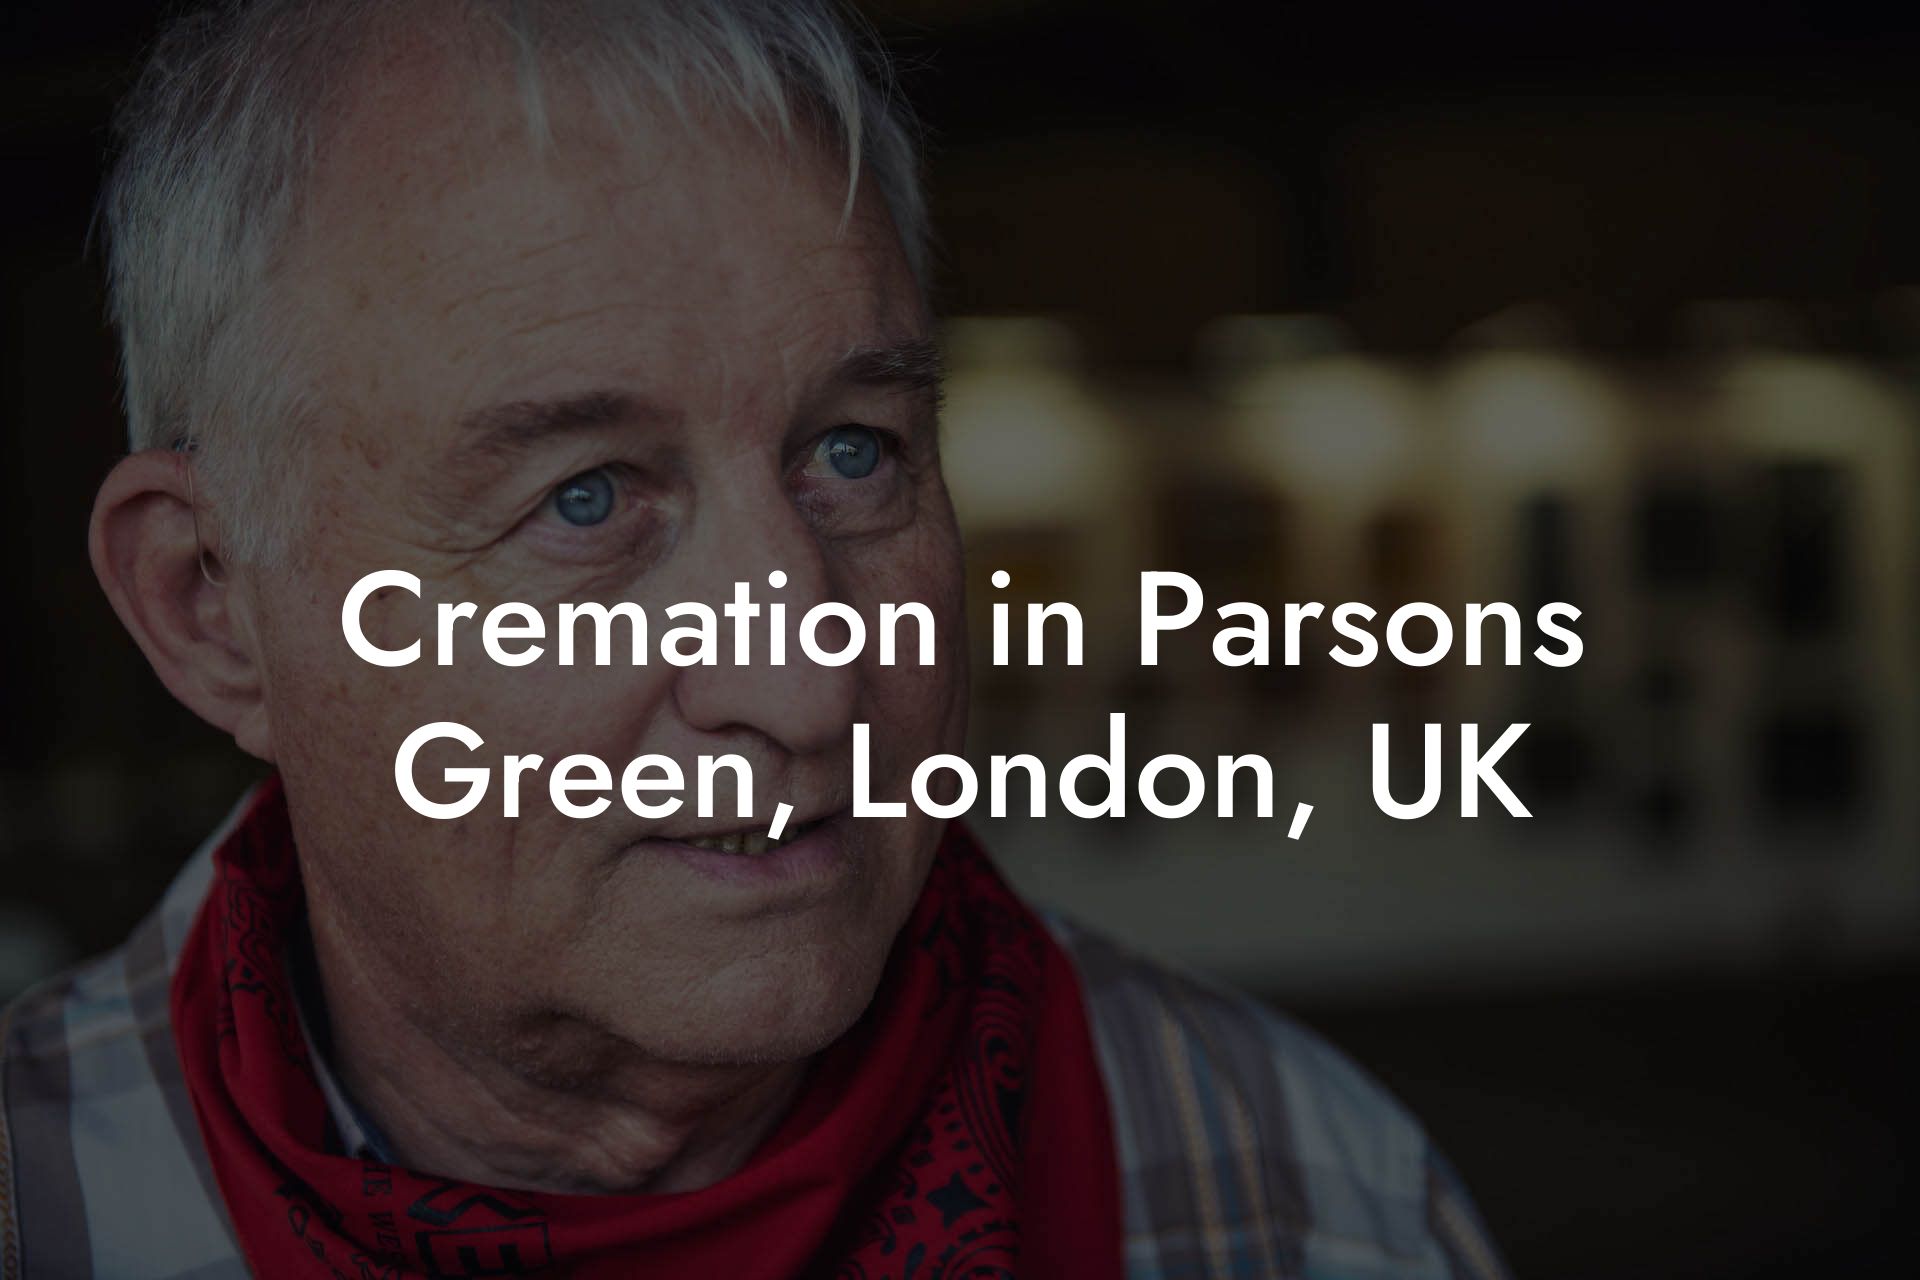 Cremation in Parsons Green, London, UK